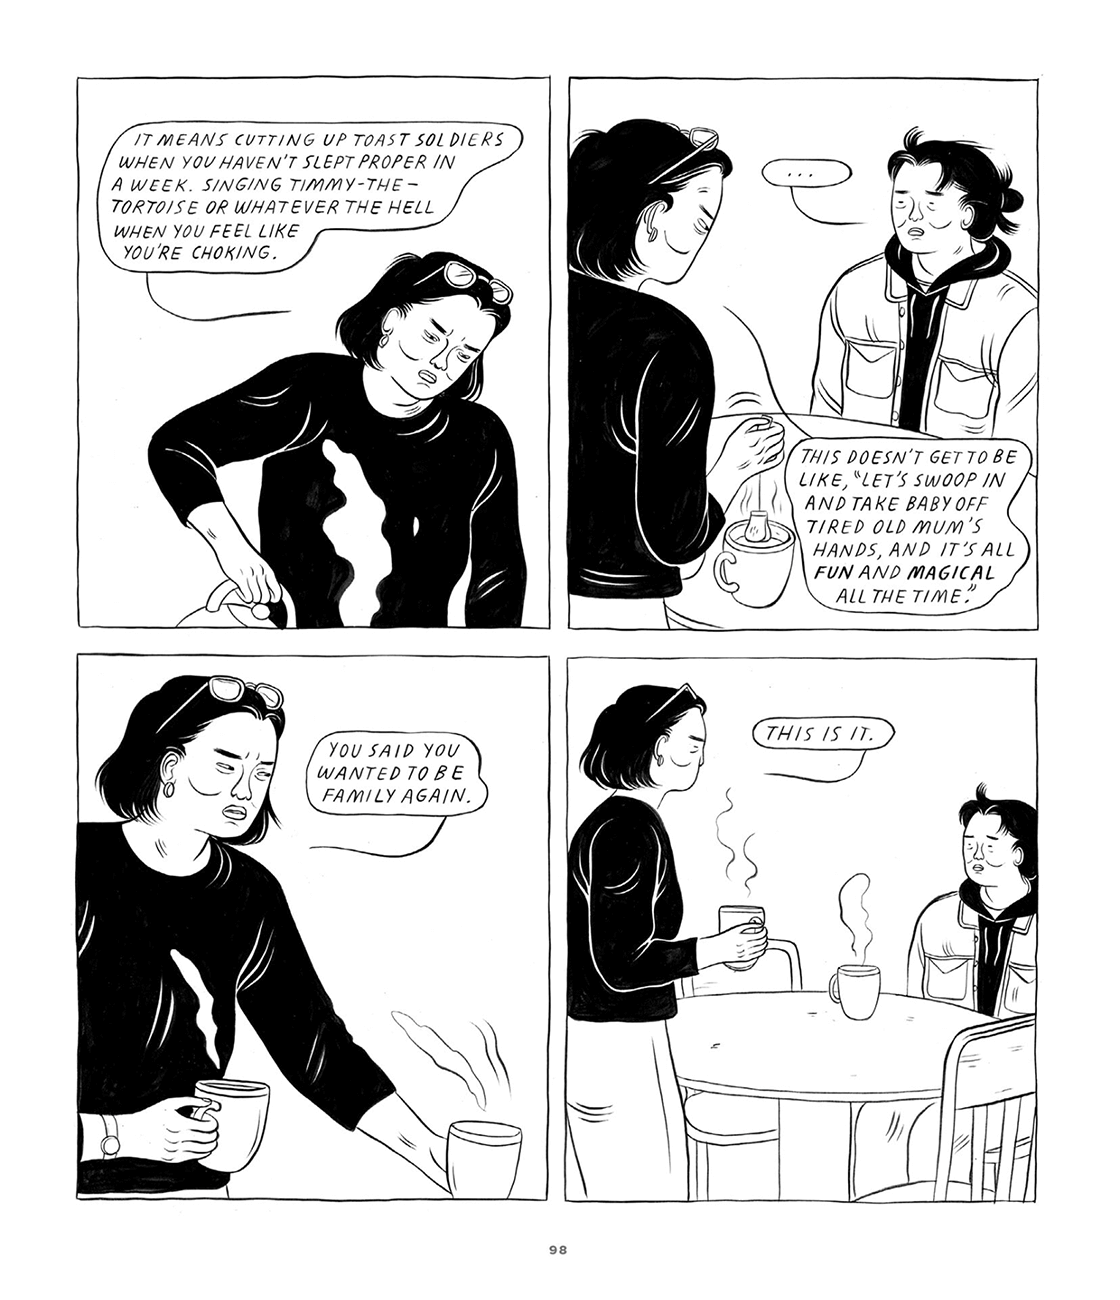 Page 98 of Stone Fruit contains four monochromatic panels in which Ray’s sister Amanda lectures her on the importance of showing up for the people you love.